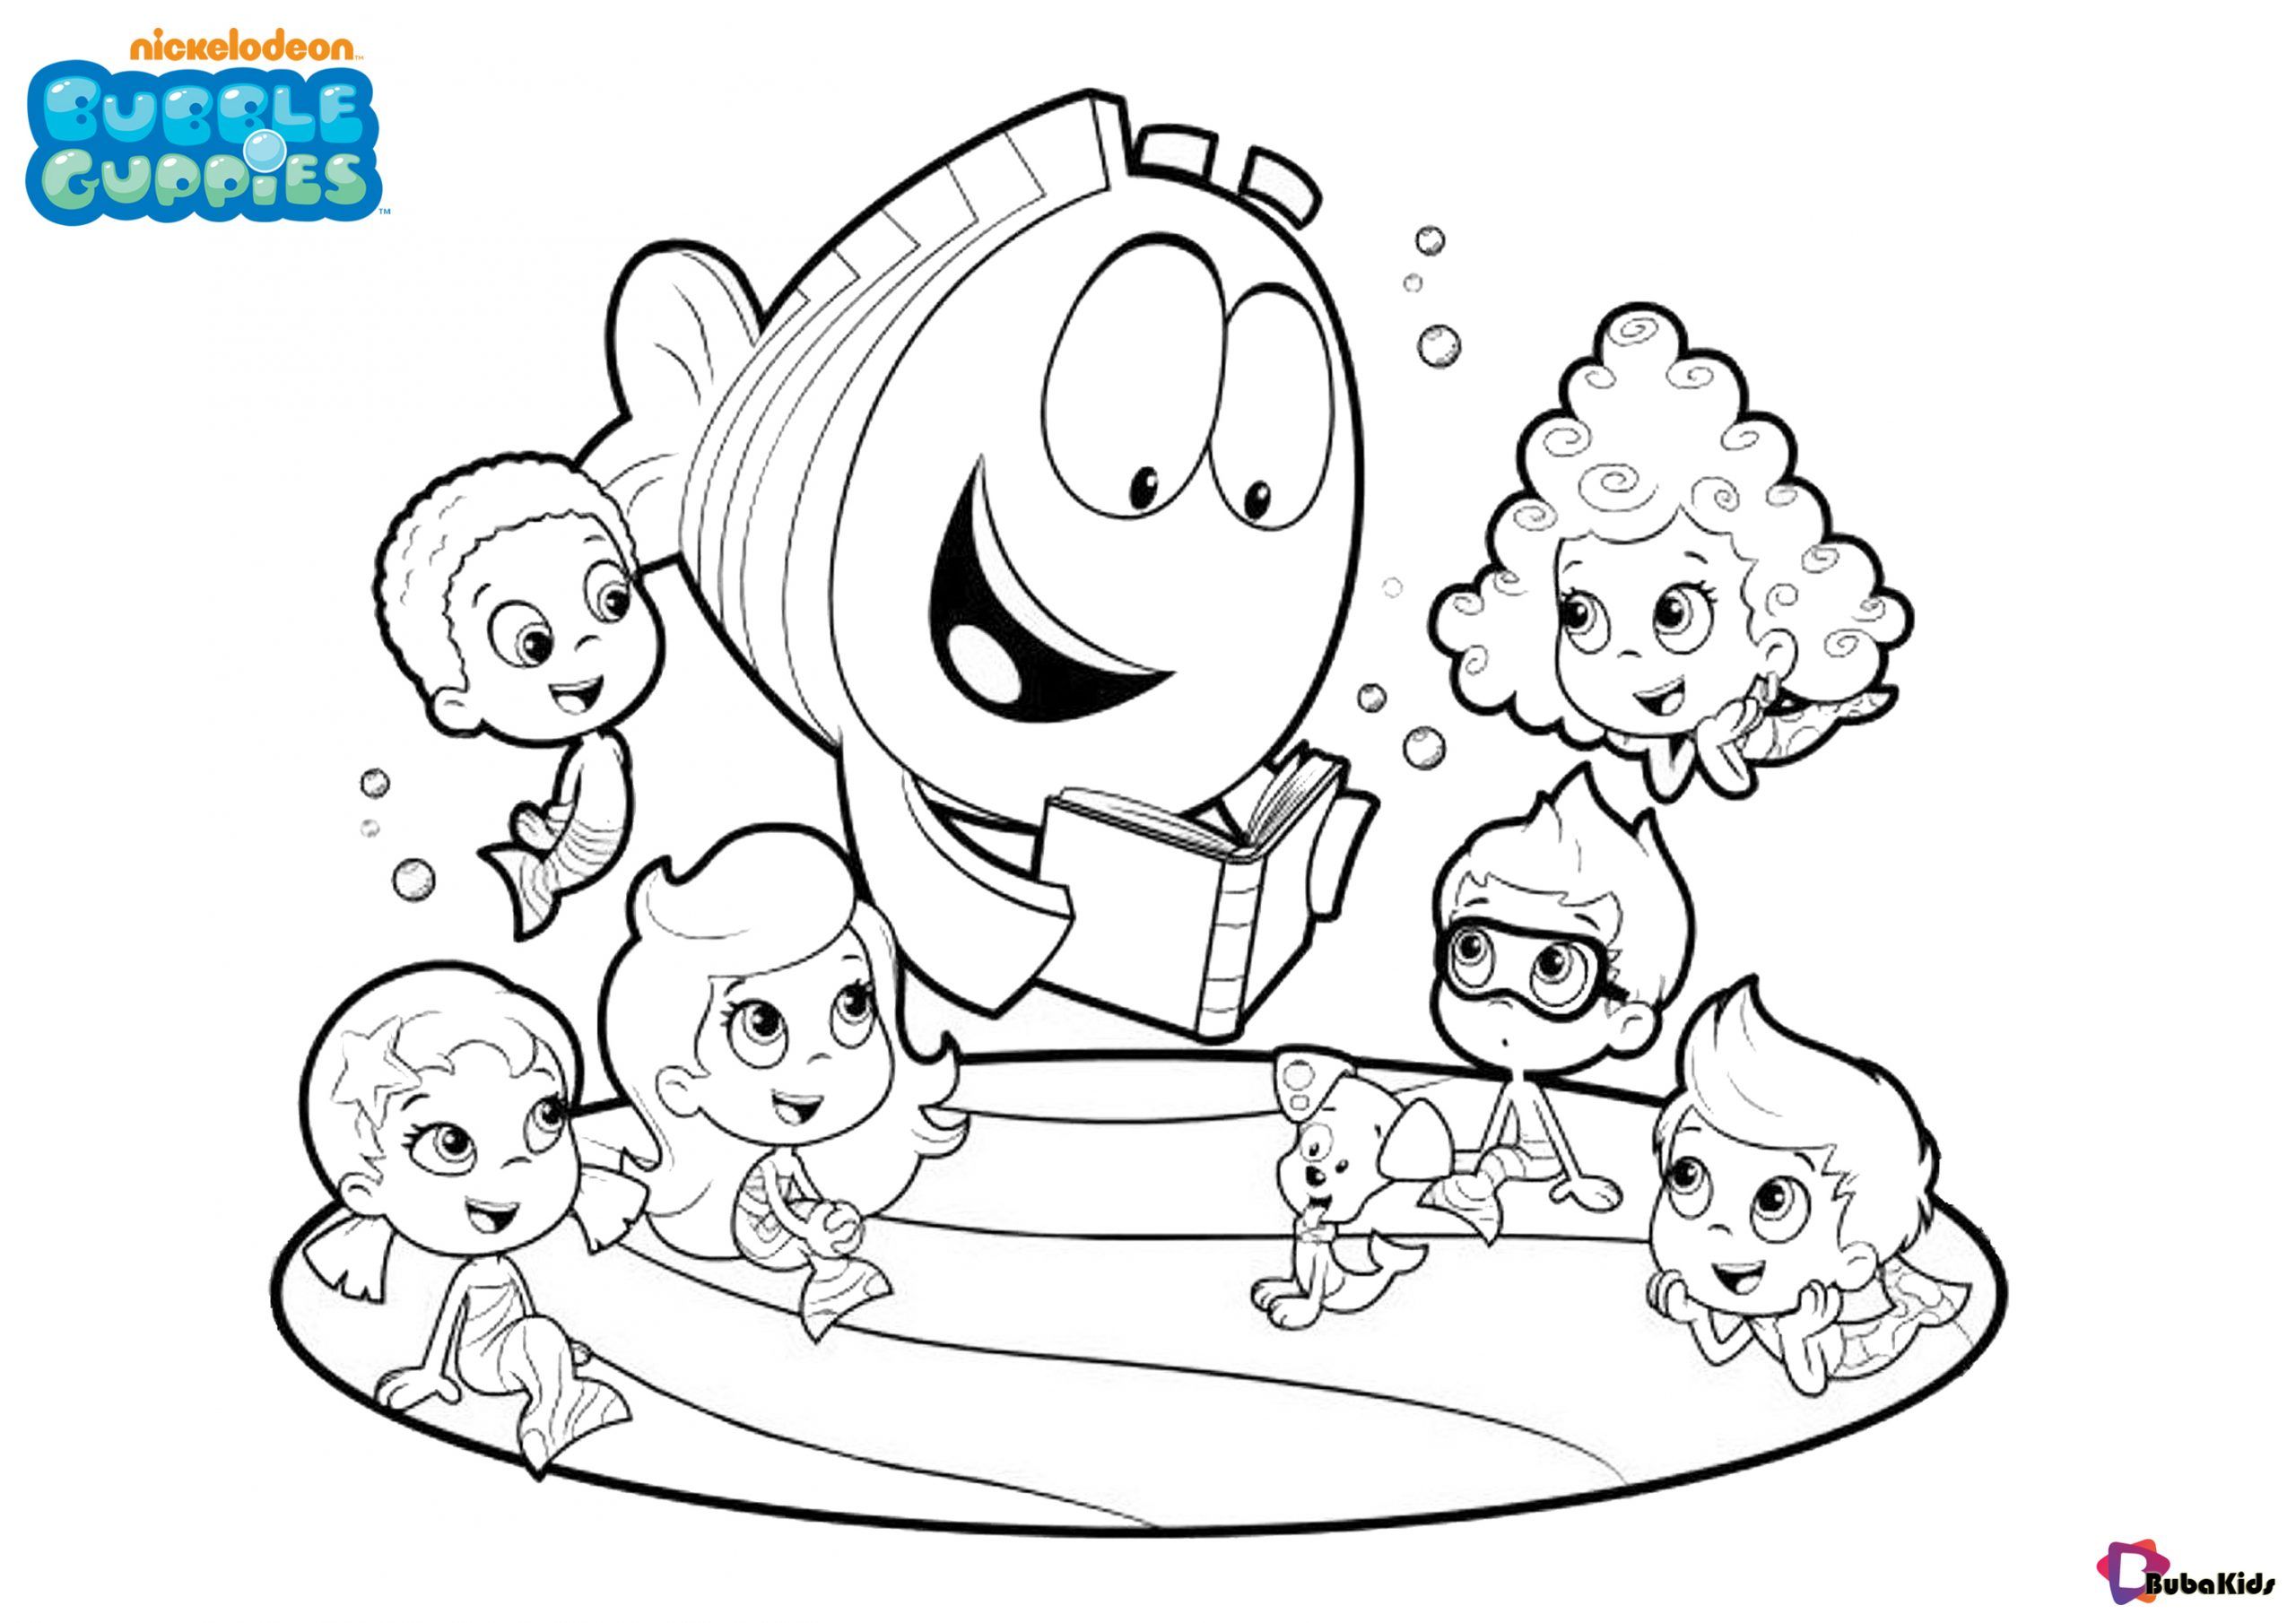 Printable bubble guppies coloring pages free download to print collection of cartoon colorâ cartoon coloring pages bubble guppies coloring pages coloring books